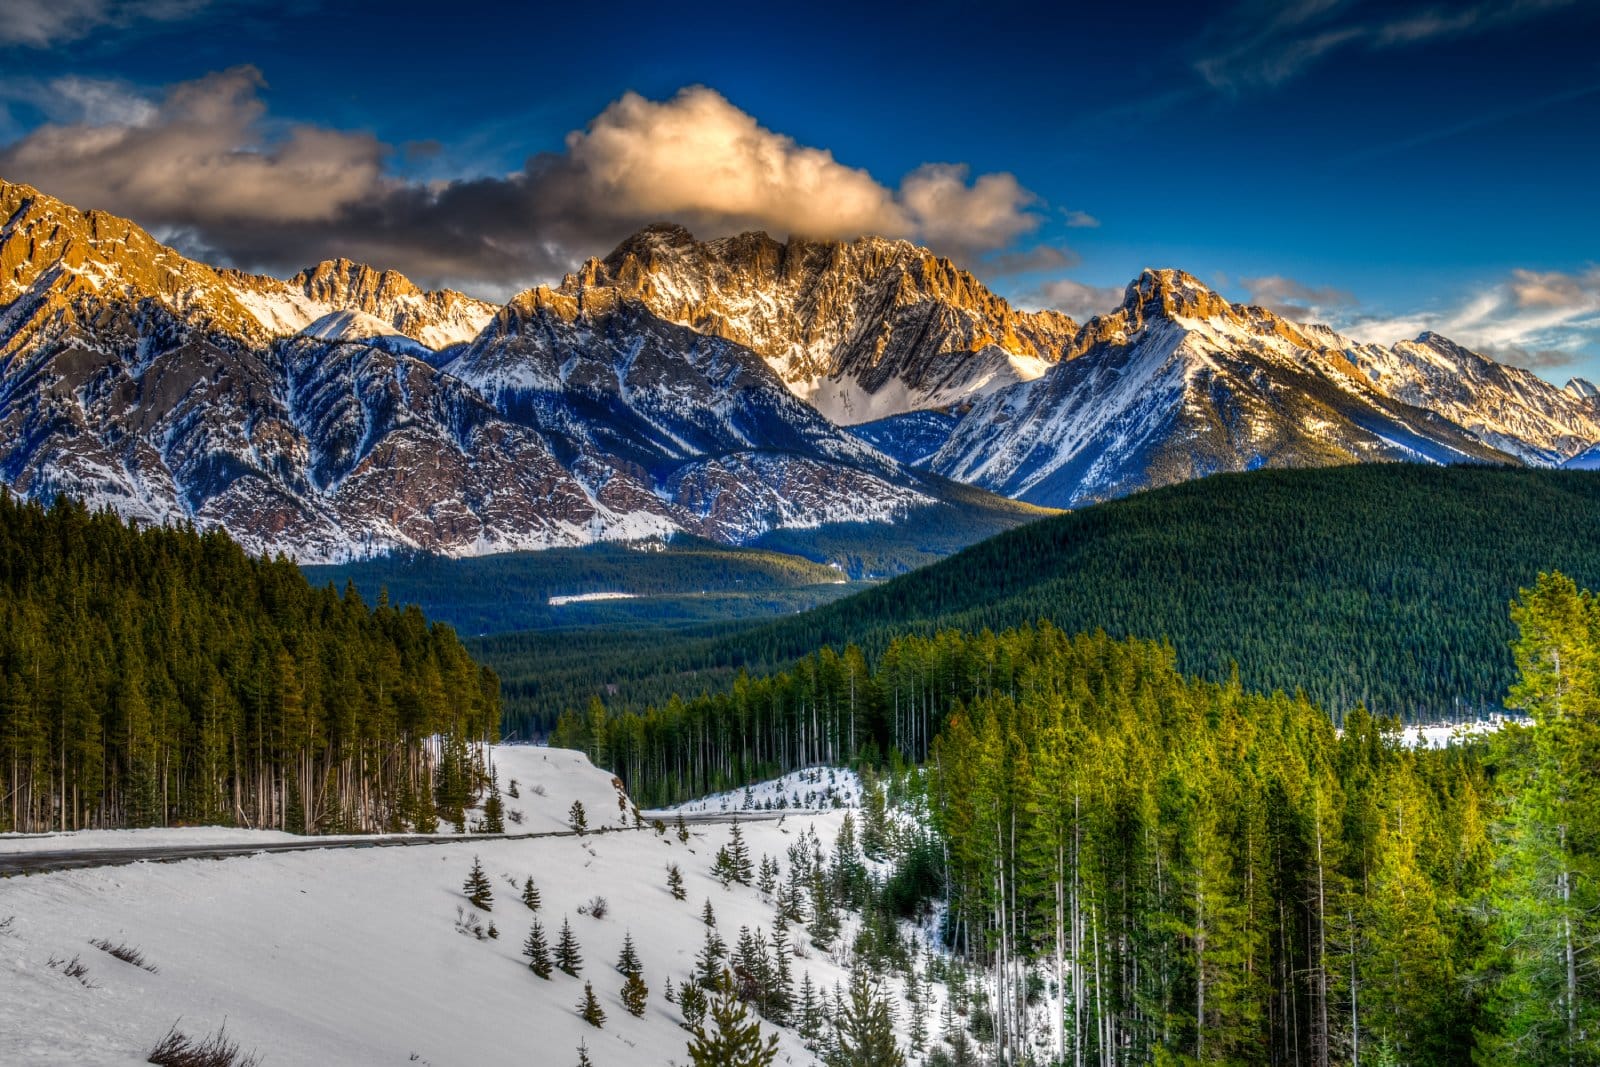 <p class="wp-caption-text">Image Credit: Shutterstock / BGSmith</p>  <p><span>Kananaskis Country, a network of provincial parks and recreation areas surrounding the town of Canmore, is a hidden gem offering a diverse range of outdoor activities without the crowds of the nearby national parks. Its rugged terrain encompasses everything from rolling foothills to sharp mountain peaks, providing a playground for hiking, mountain biking, and horseback riding. The area is also home to the Nakiska Ski Area, which hosted alpine events during the 1988 Winter Olympics.</span></p>